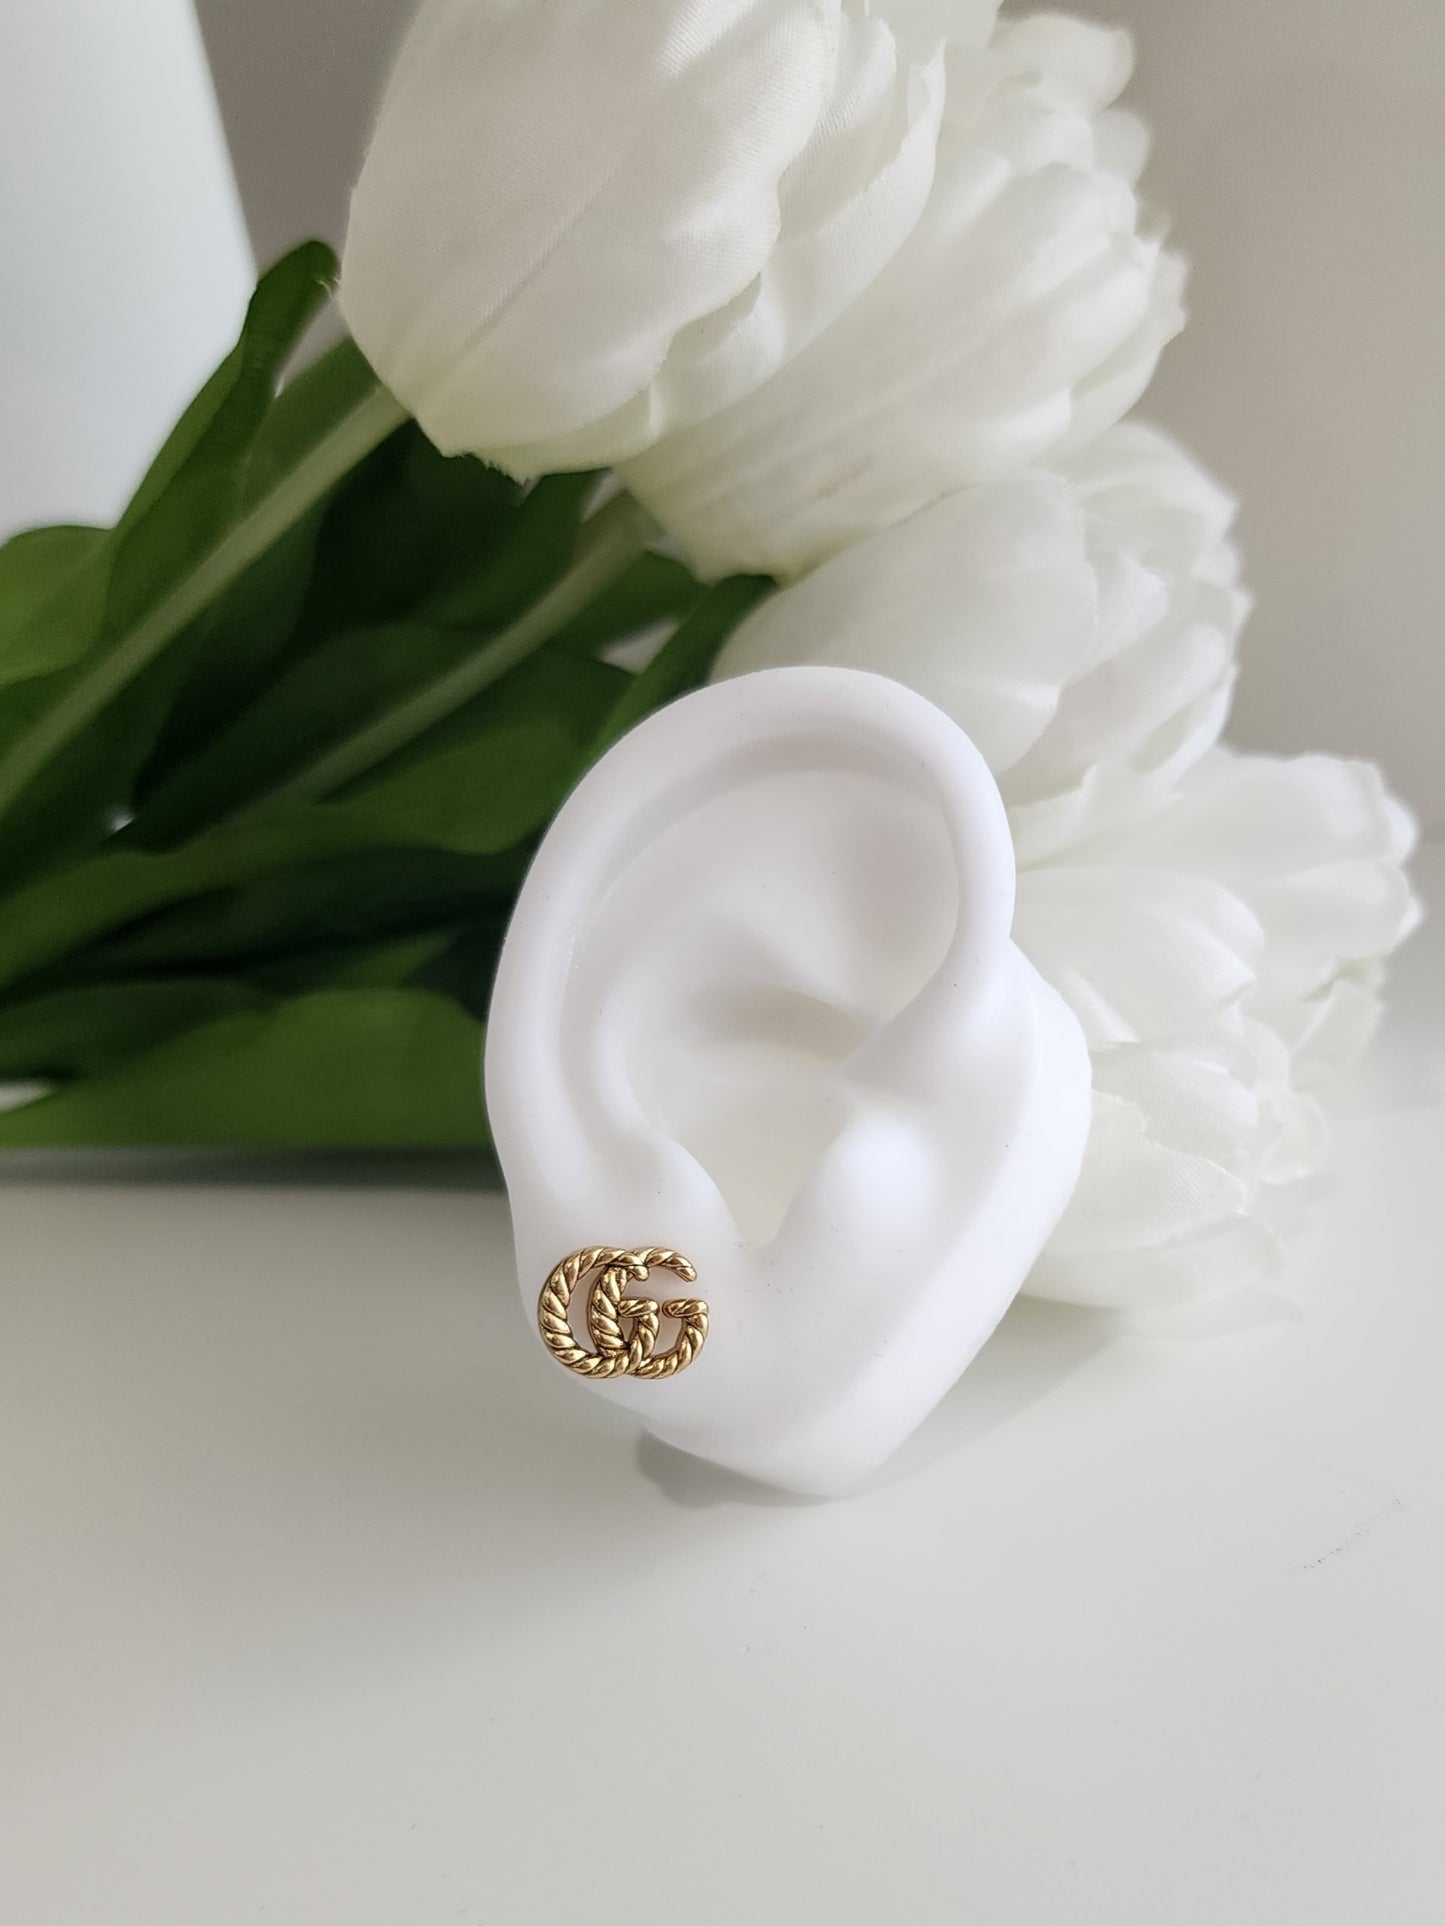 G SMALL STUD EARRINGS GOLD & SILVER